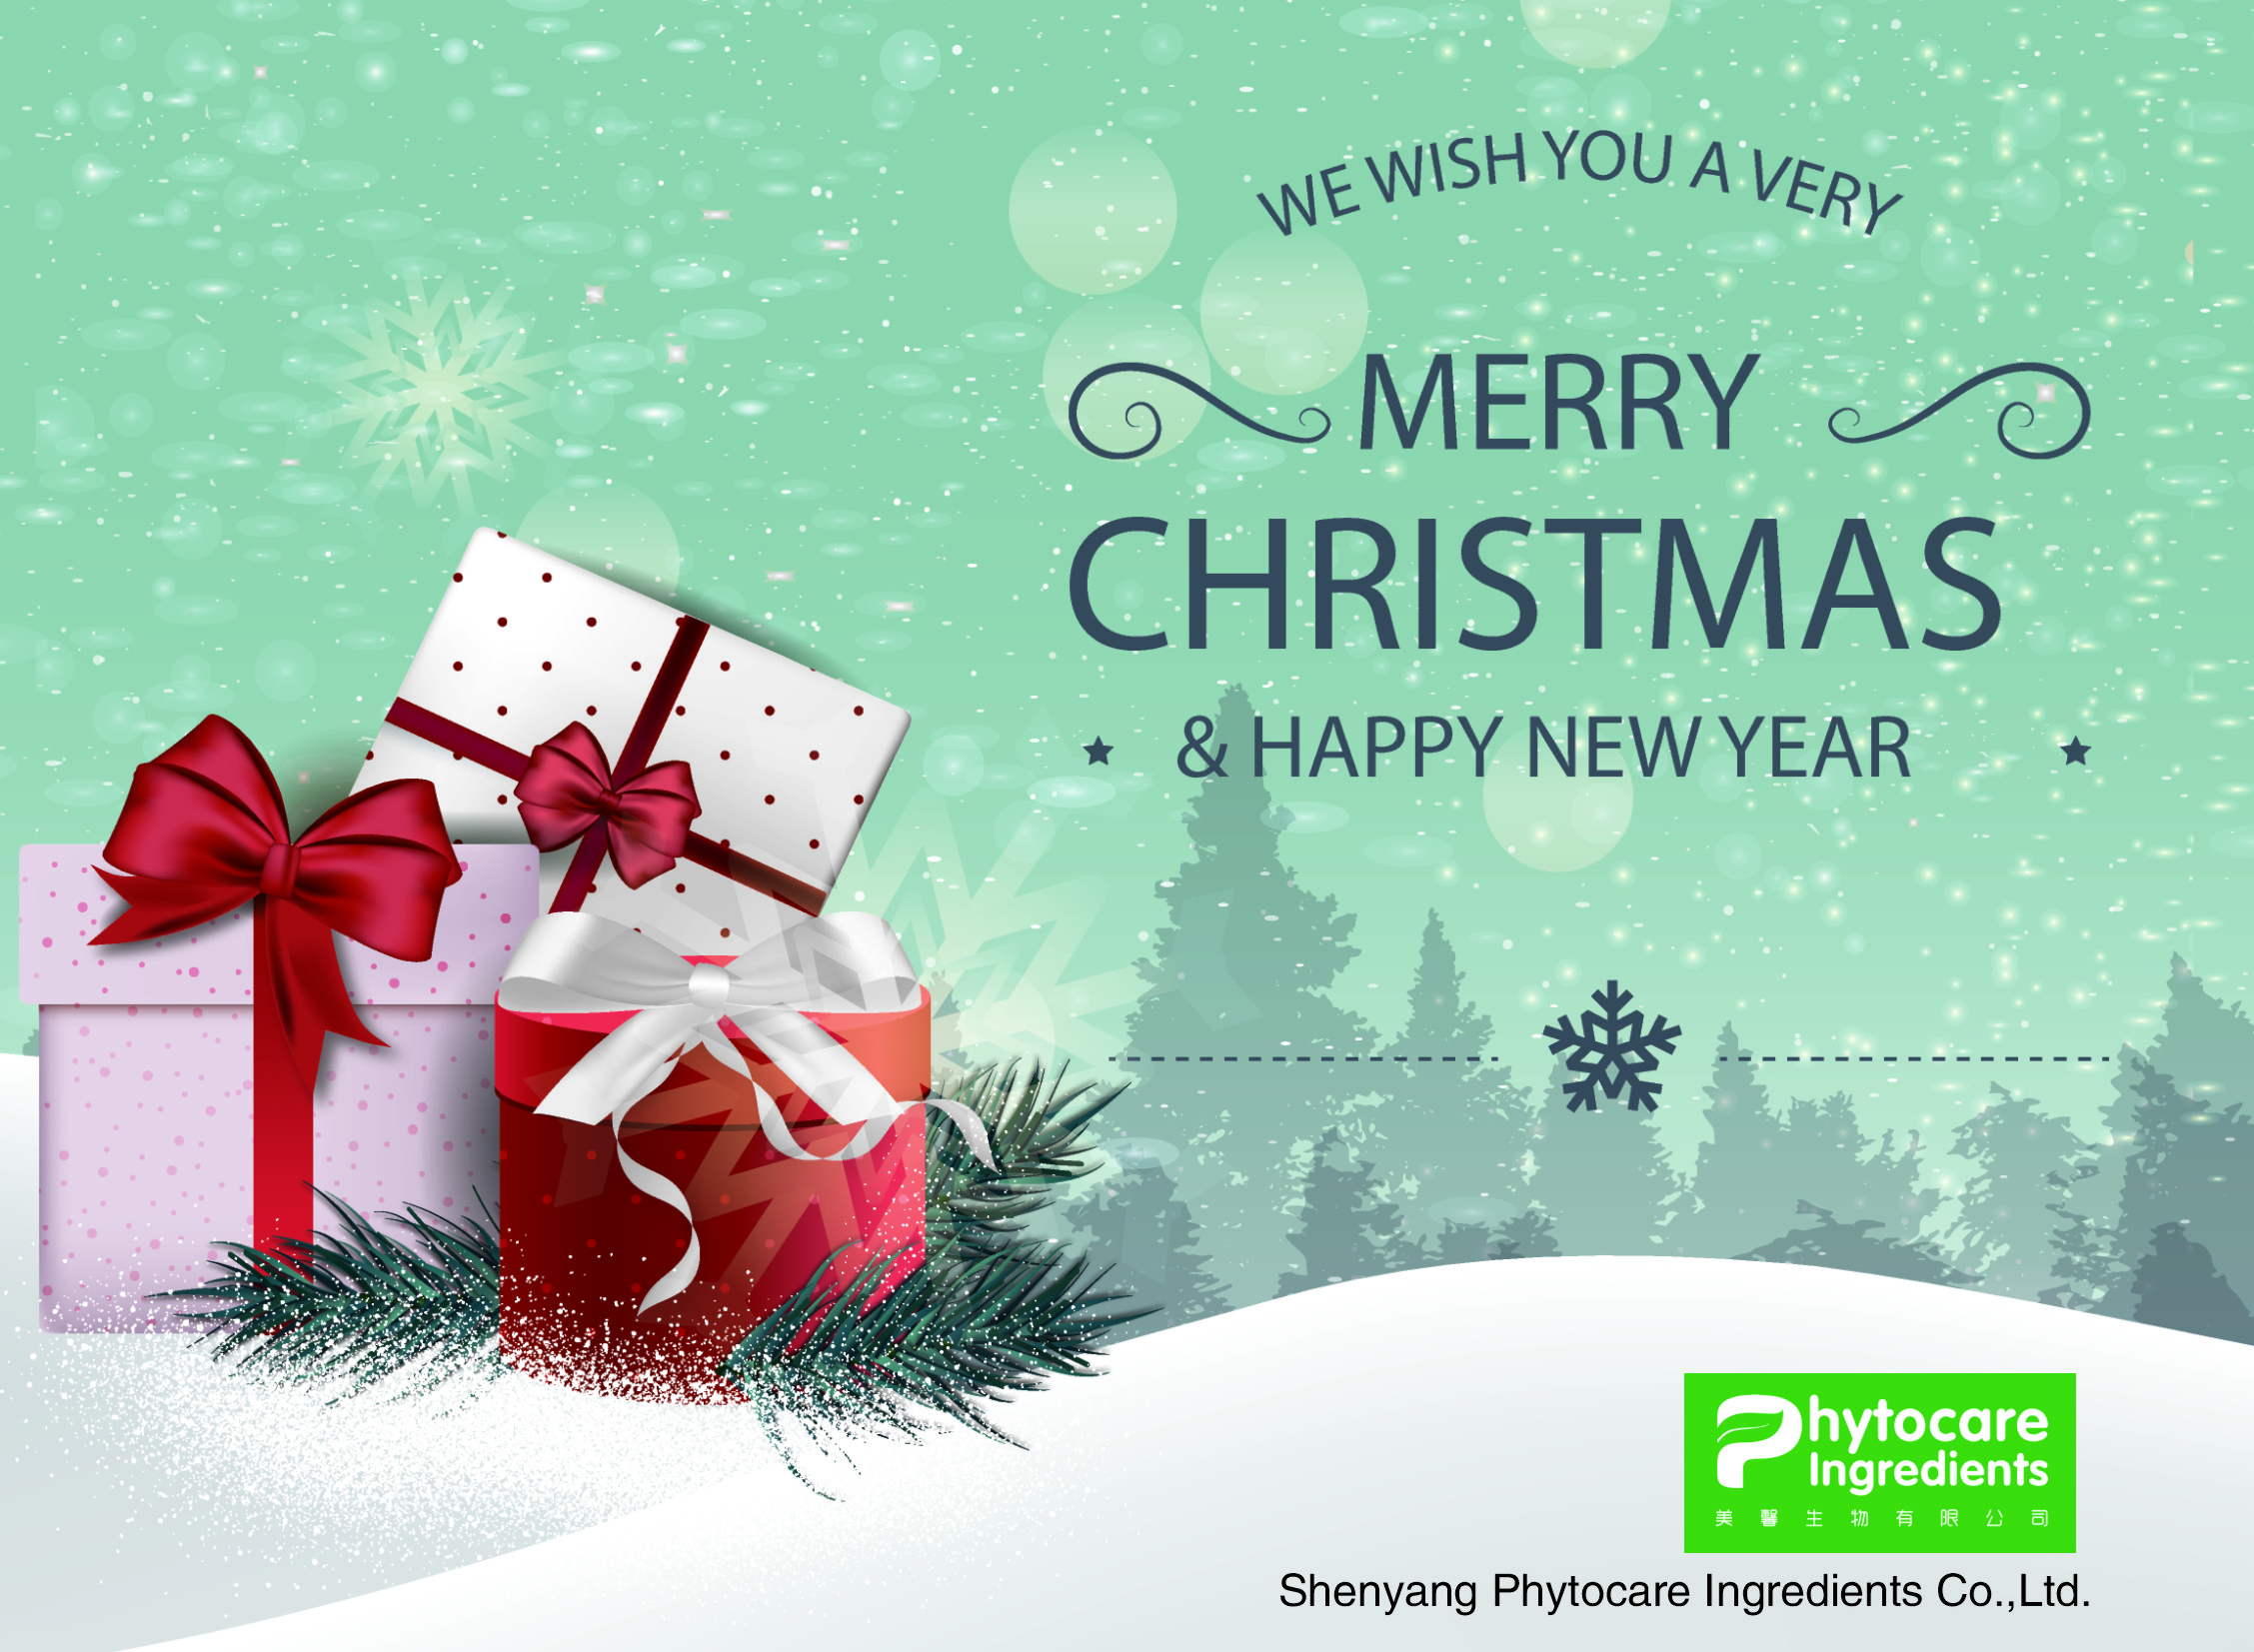 Merry Christmas & Happy New Year from Phytocare Team!